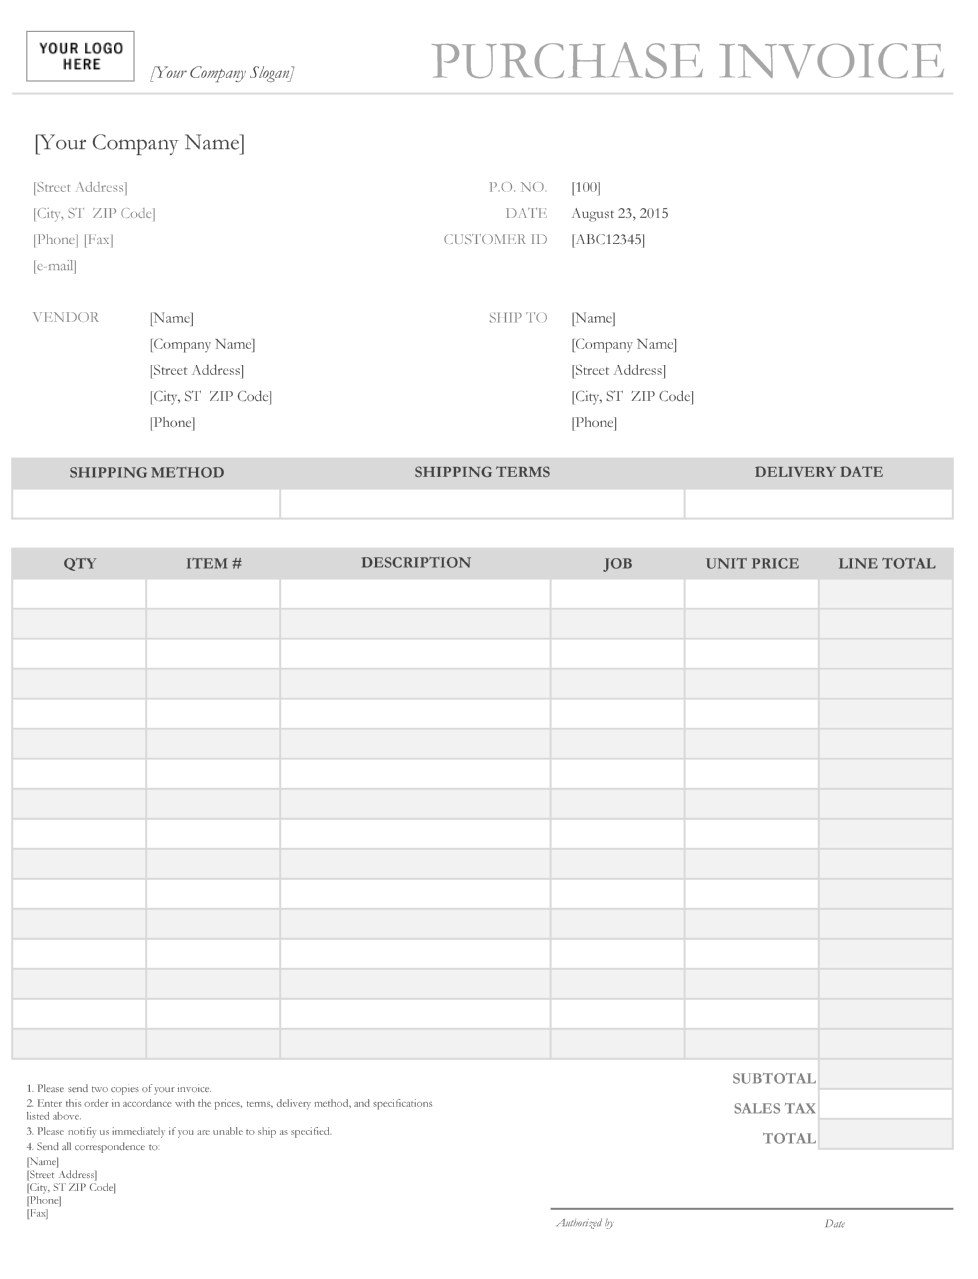 Product Purchase Invoice Template 